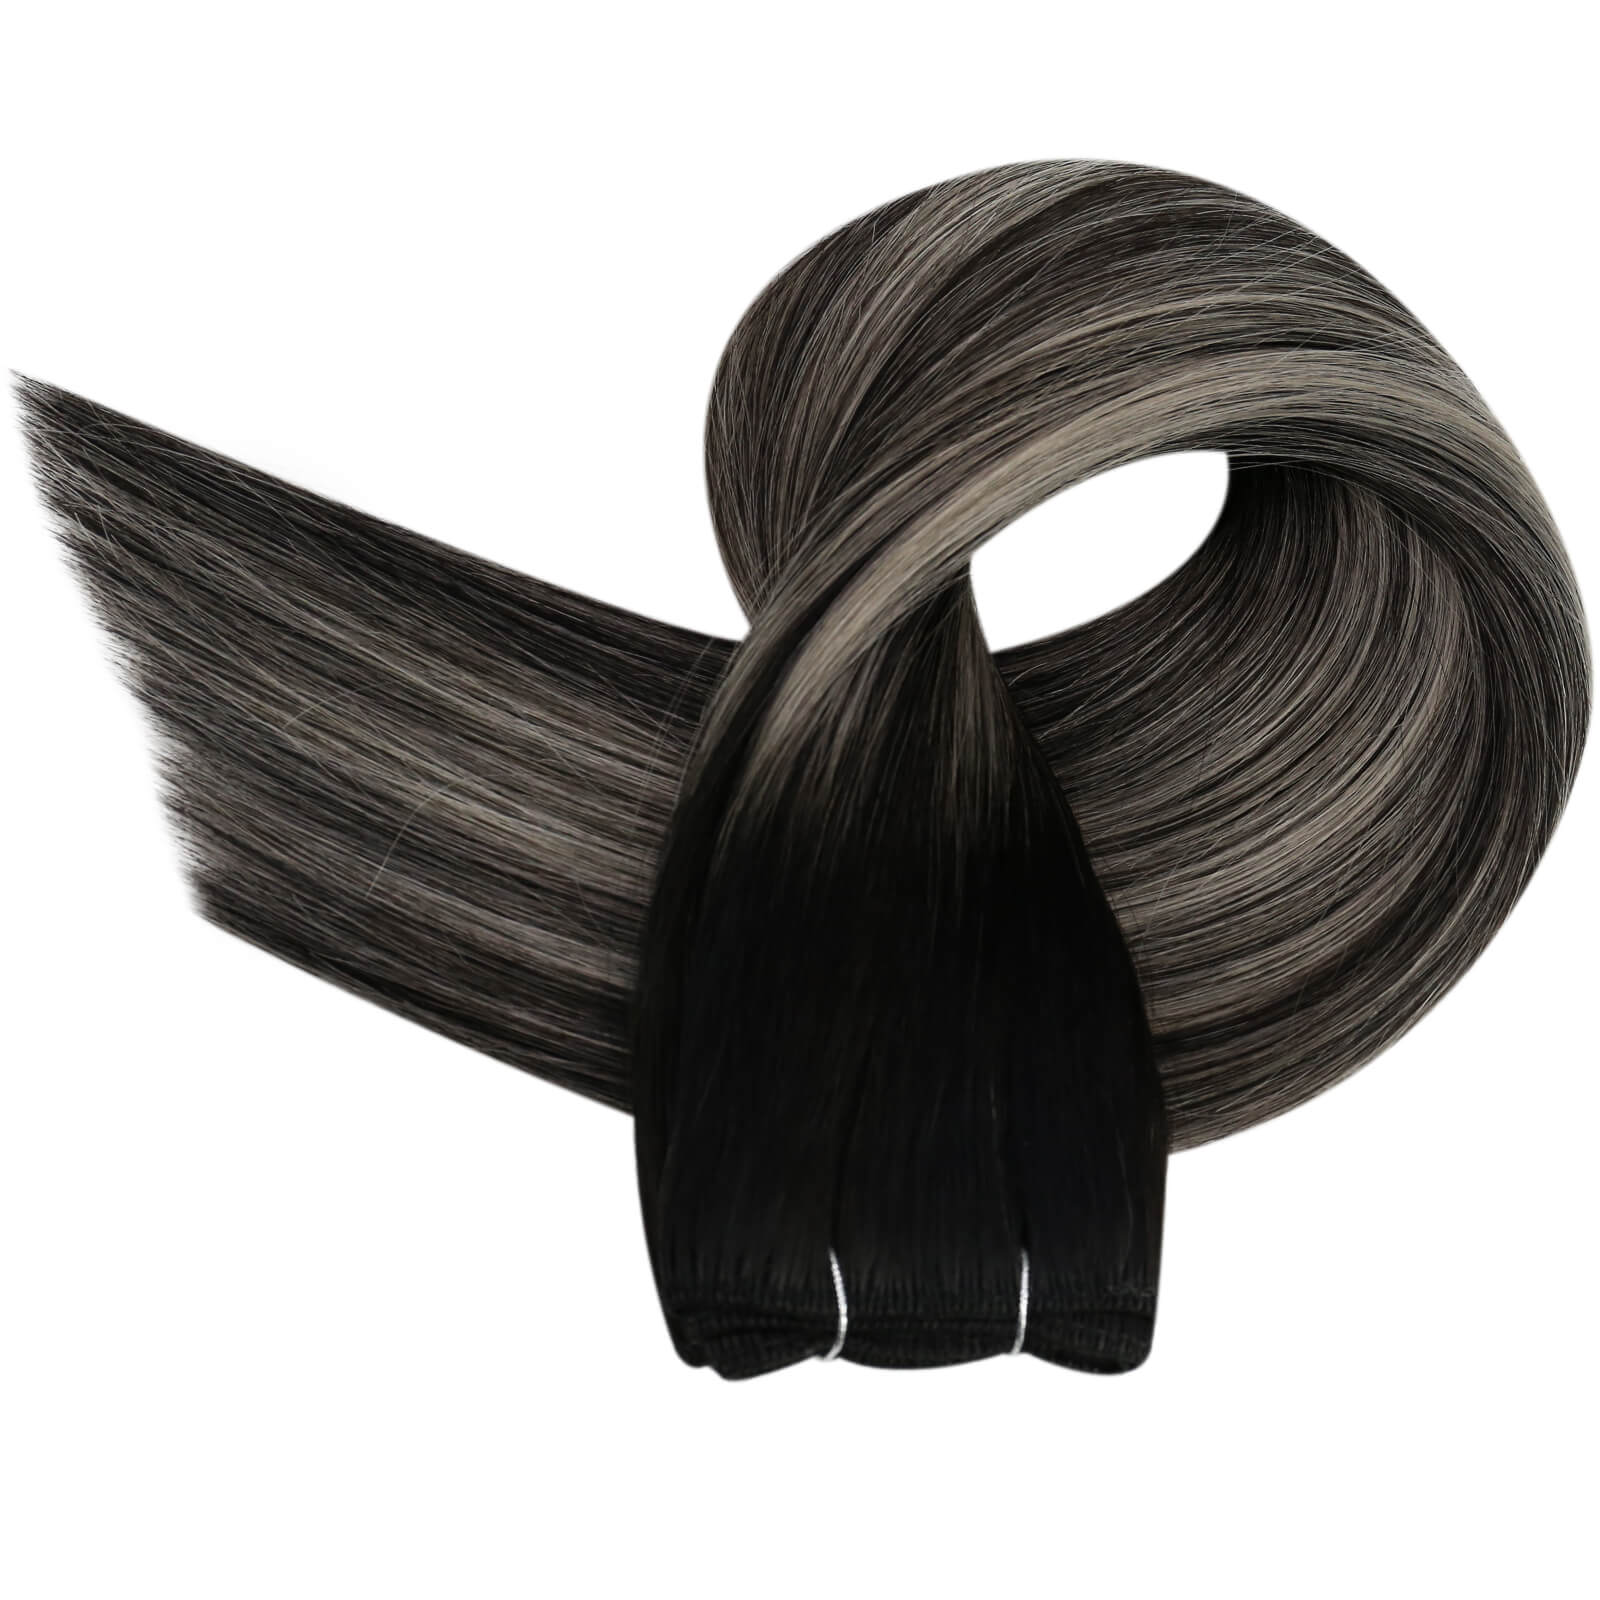 easy to apply invisible weft hair extensions